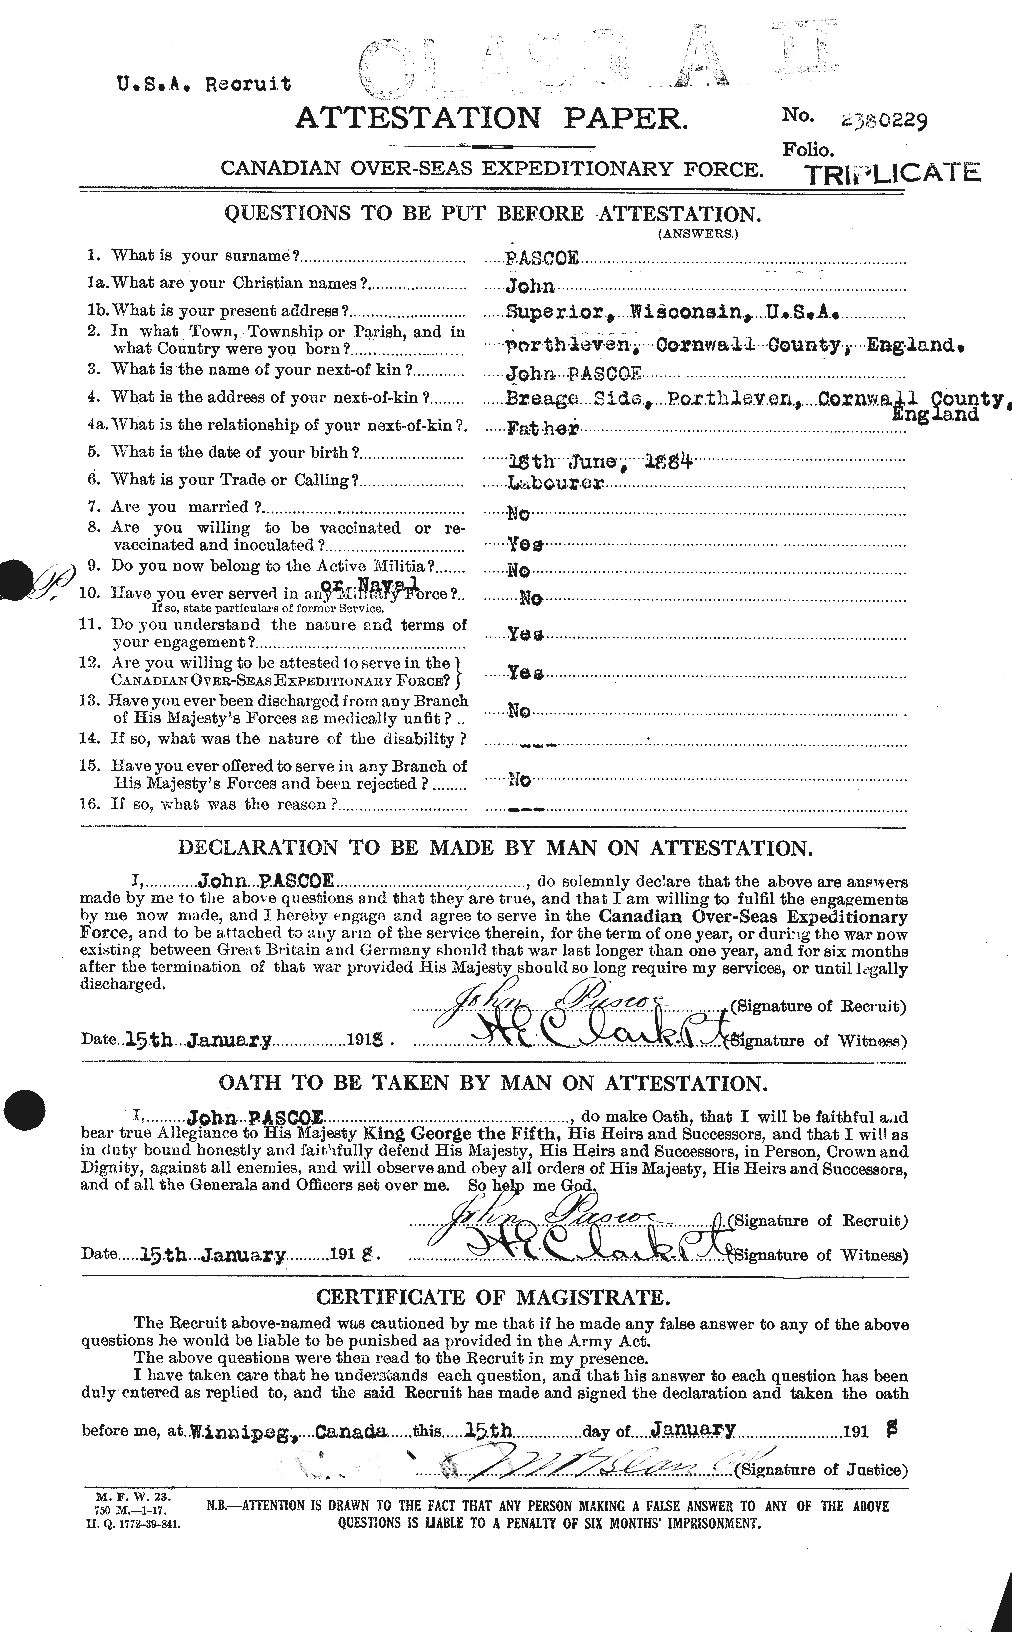 Personnel Records of the First World War - CEF 567216a